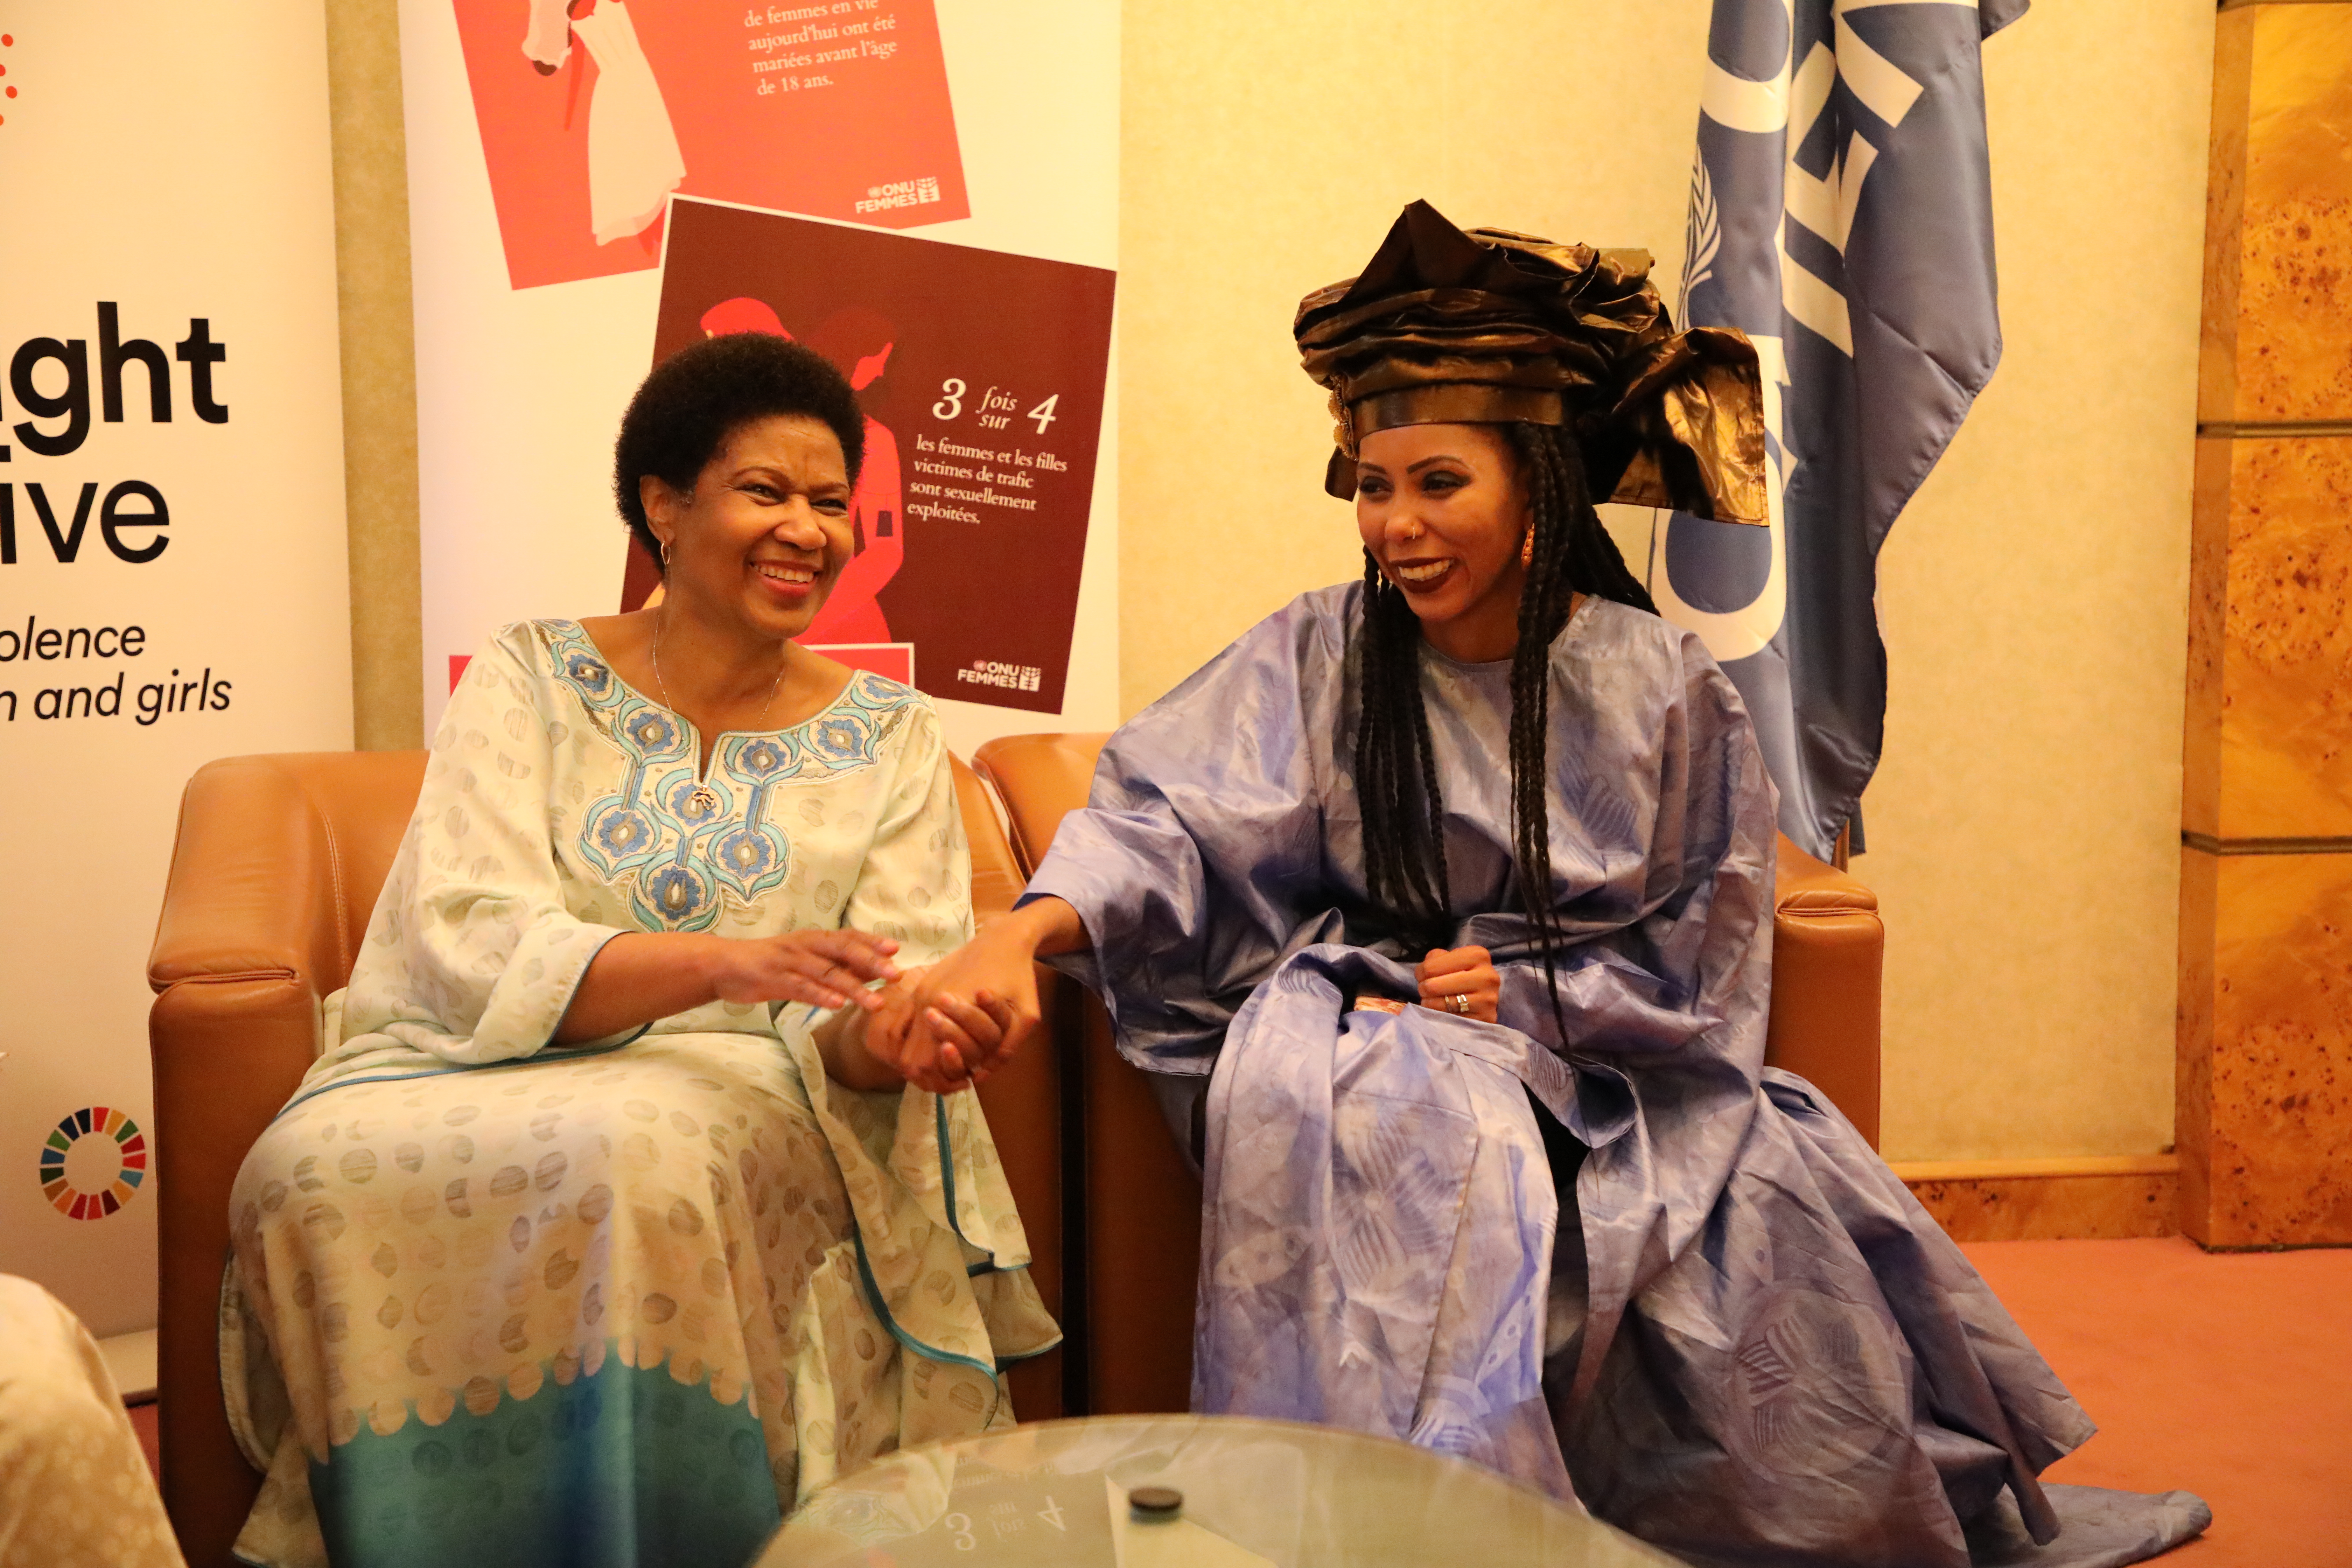 From left to right, UN Women Executive Director, Phumzile Mlambo-Ngcuka , with Jaha Dukureh during the 1st African Summit on Female Genital Mutilation (FGM) and Child Marriage (CM), taking place in Dakar, Senegal. 